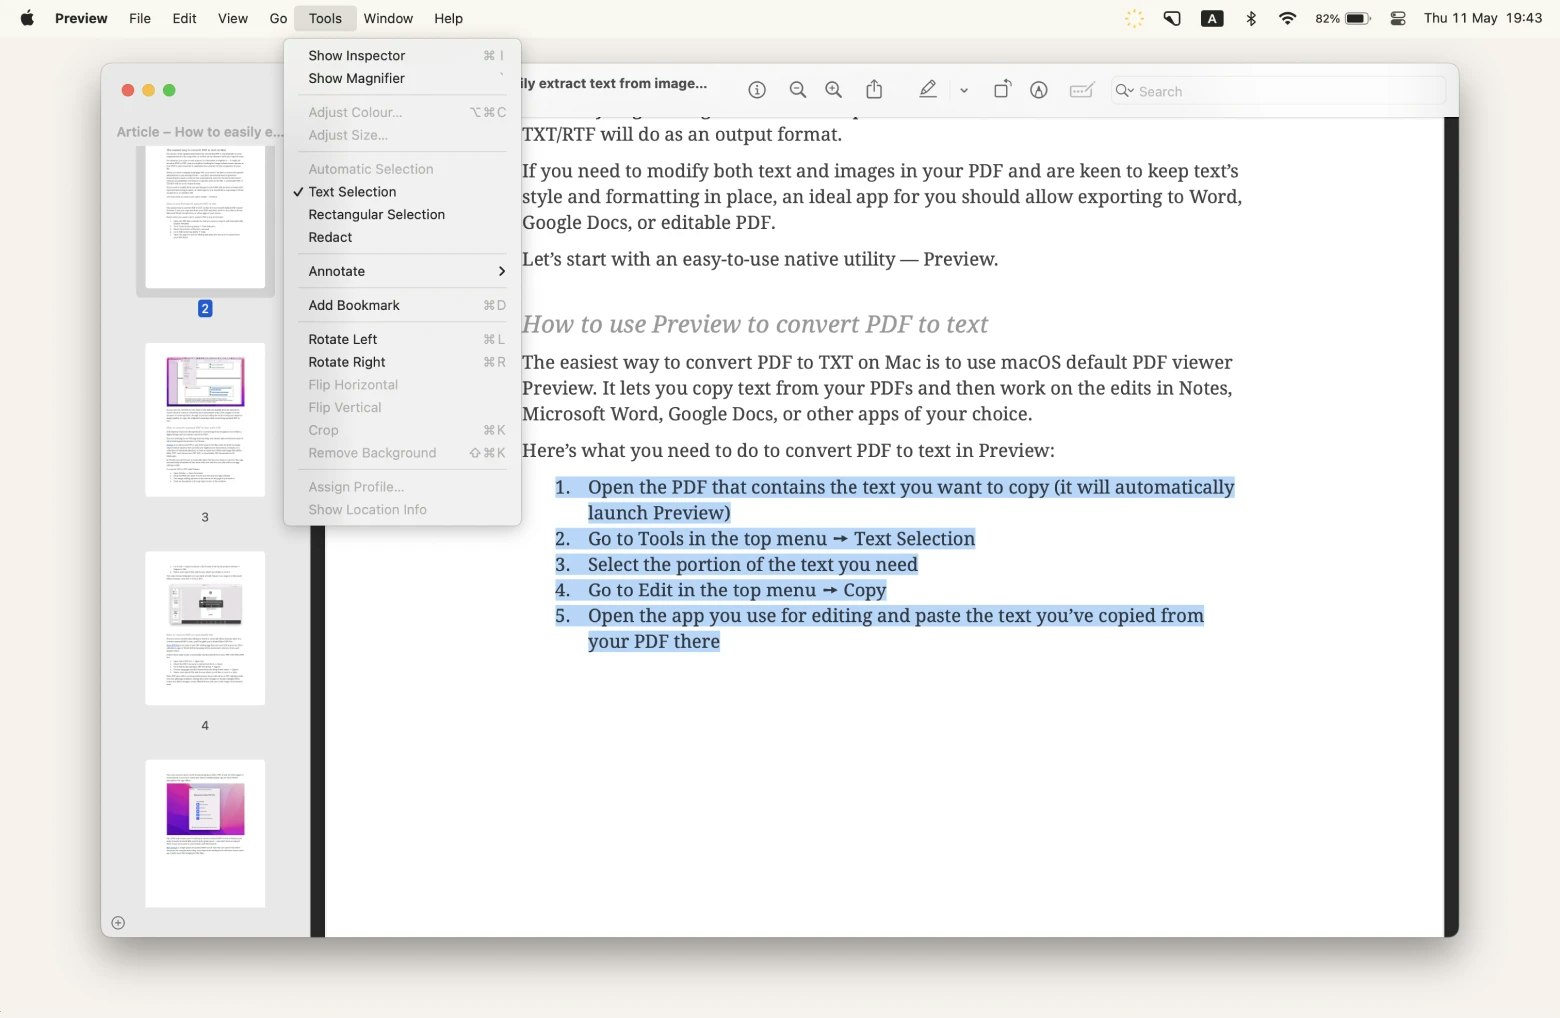 The right way to convert PDF to text